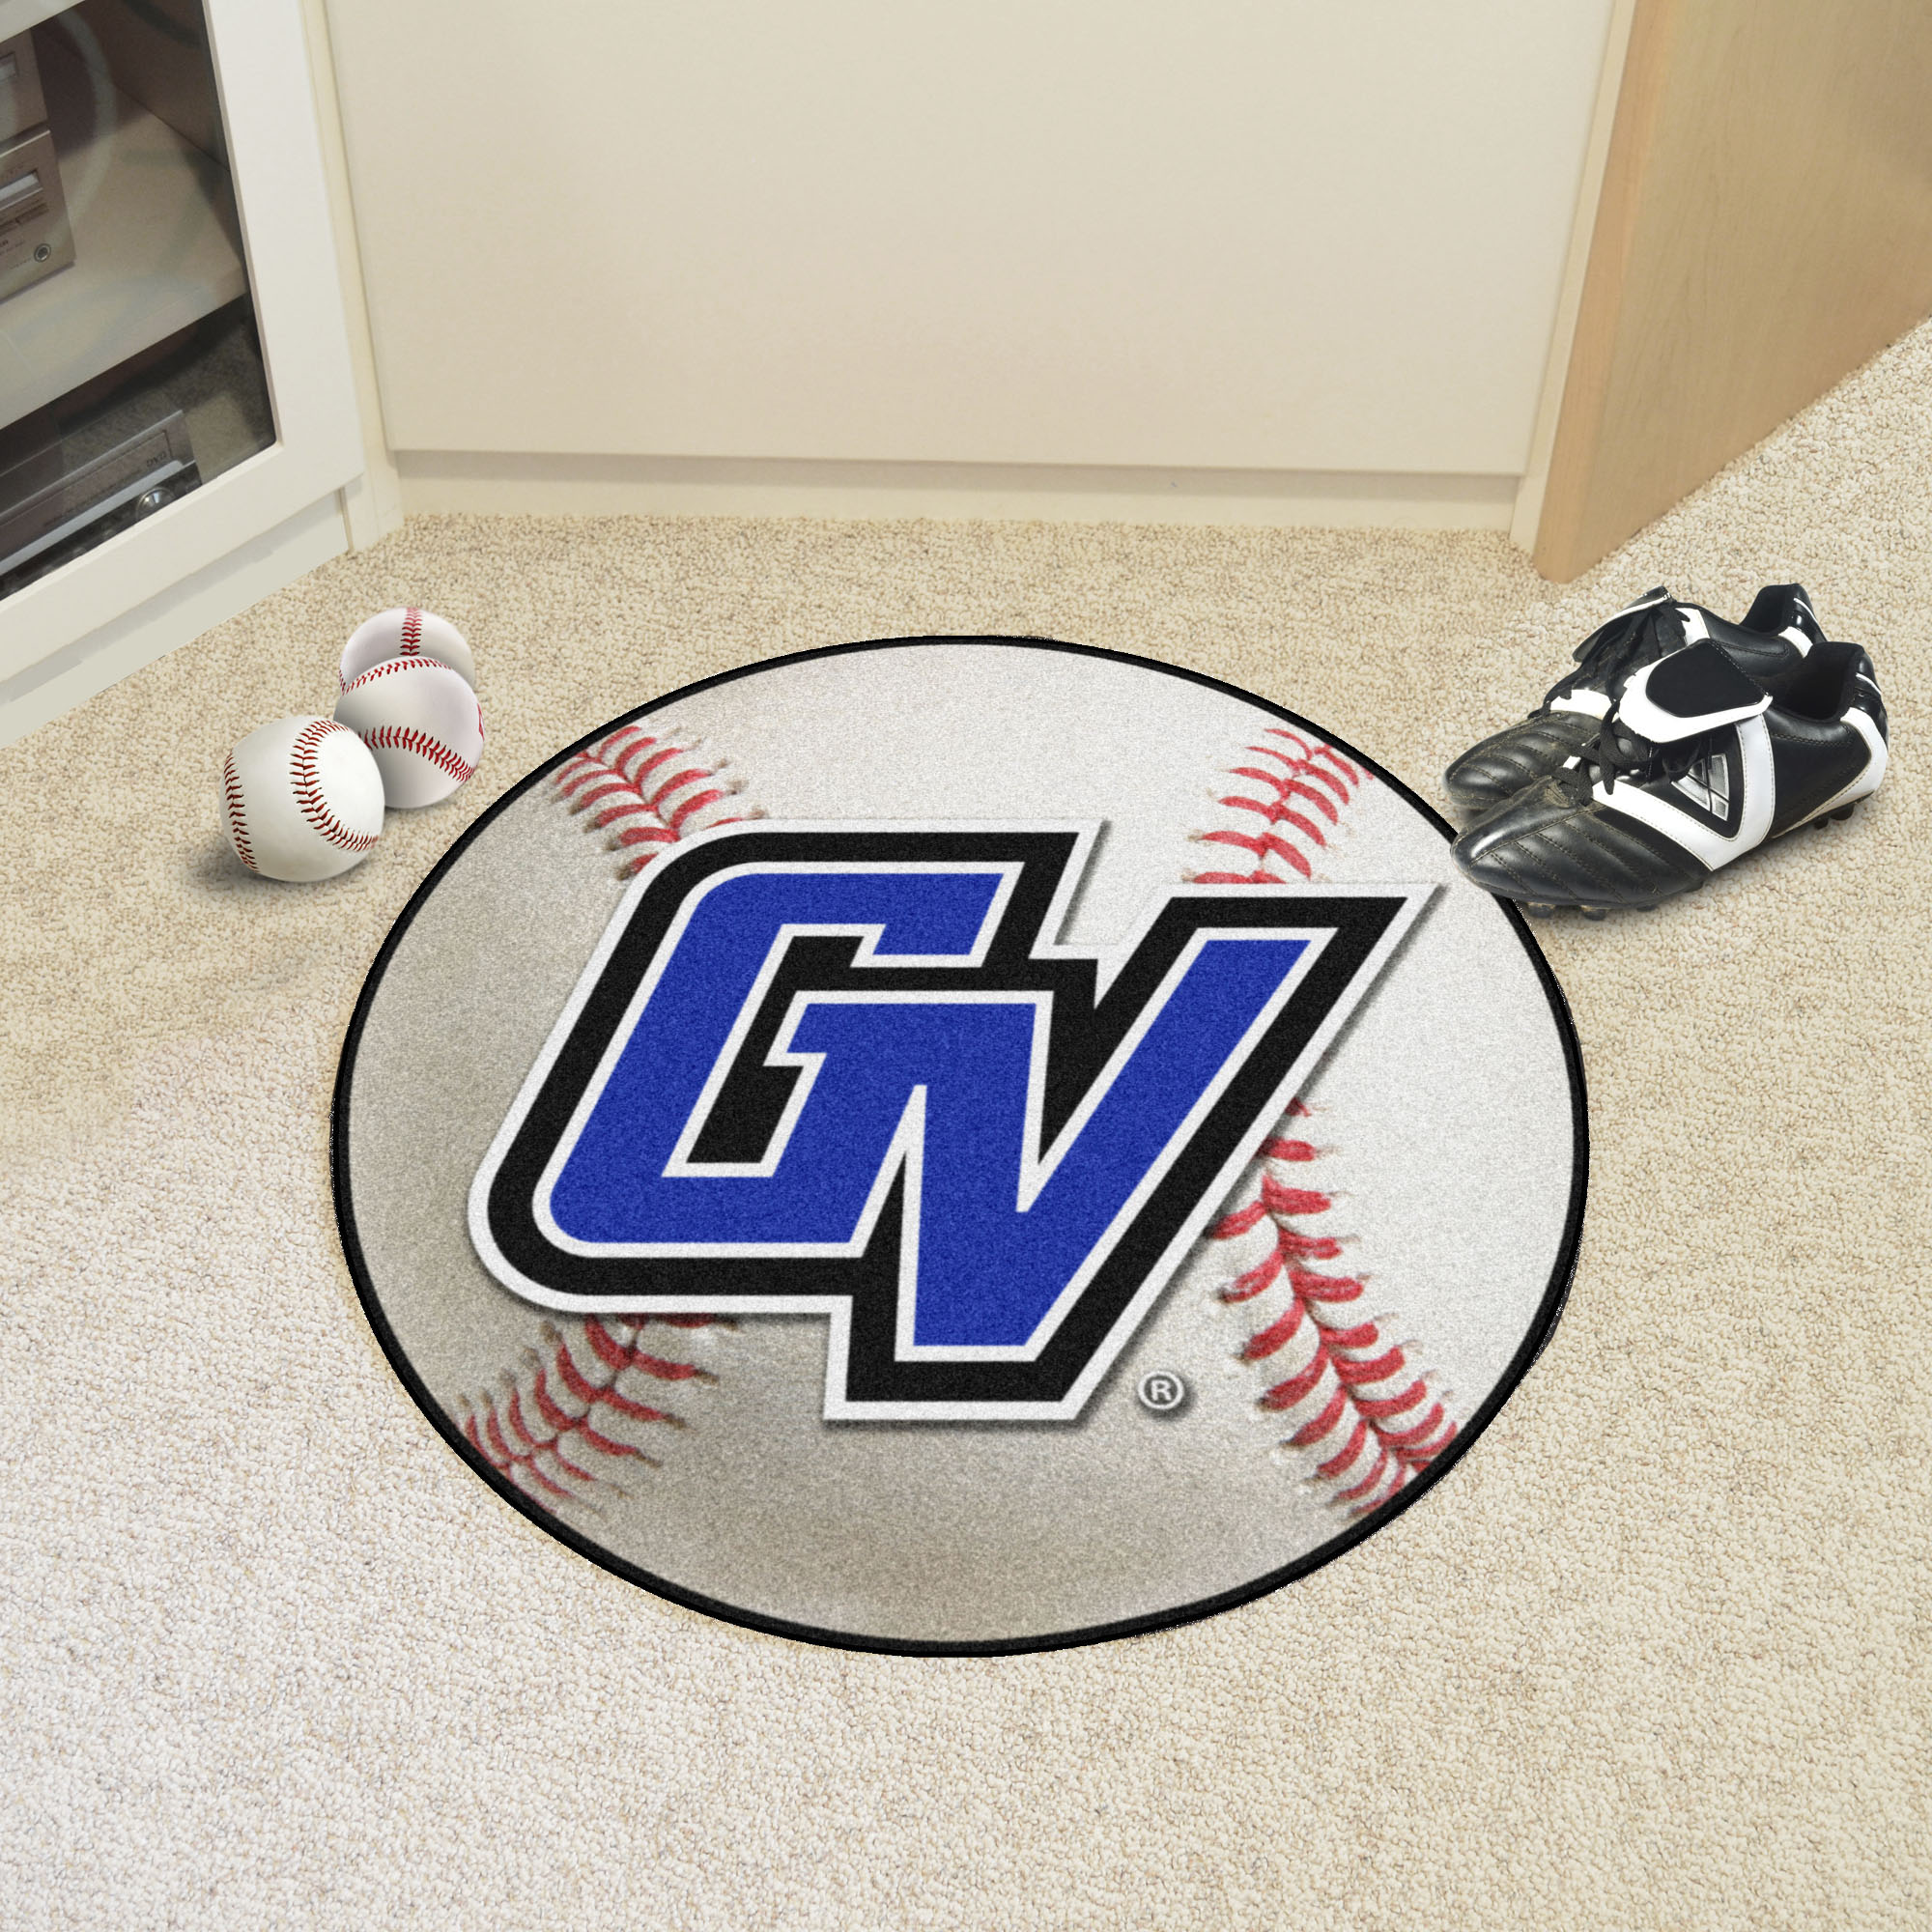 Grand Valley State University Ball Shaped Area Rugs (Ball Shaped Area Rugs: Baseball)